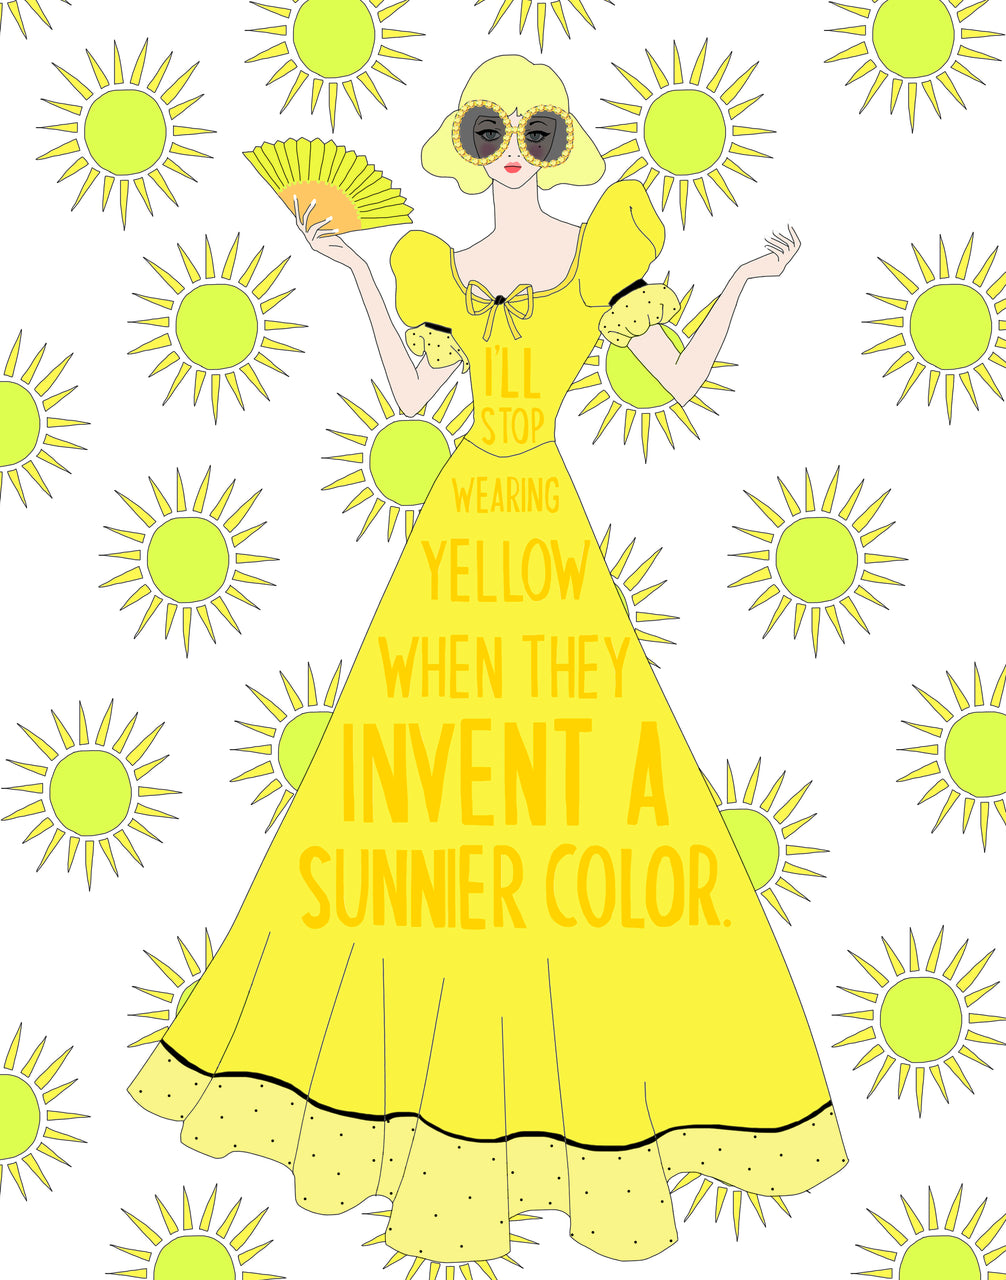 I'll Stop Wearing Yellow When They Invent a Sunnier Color.